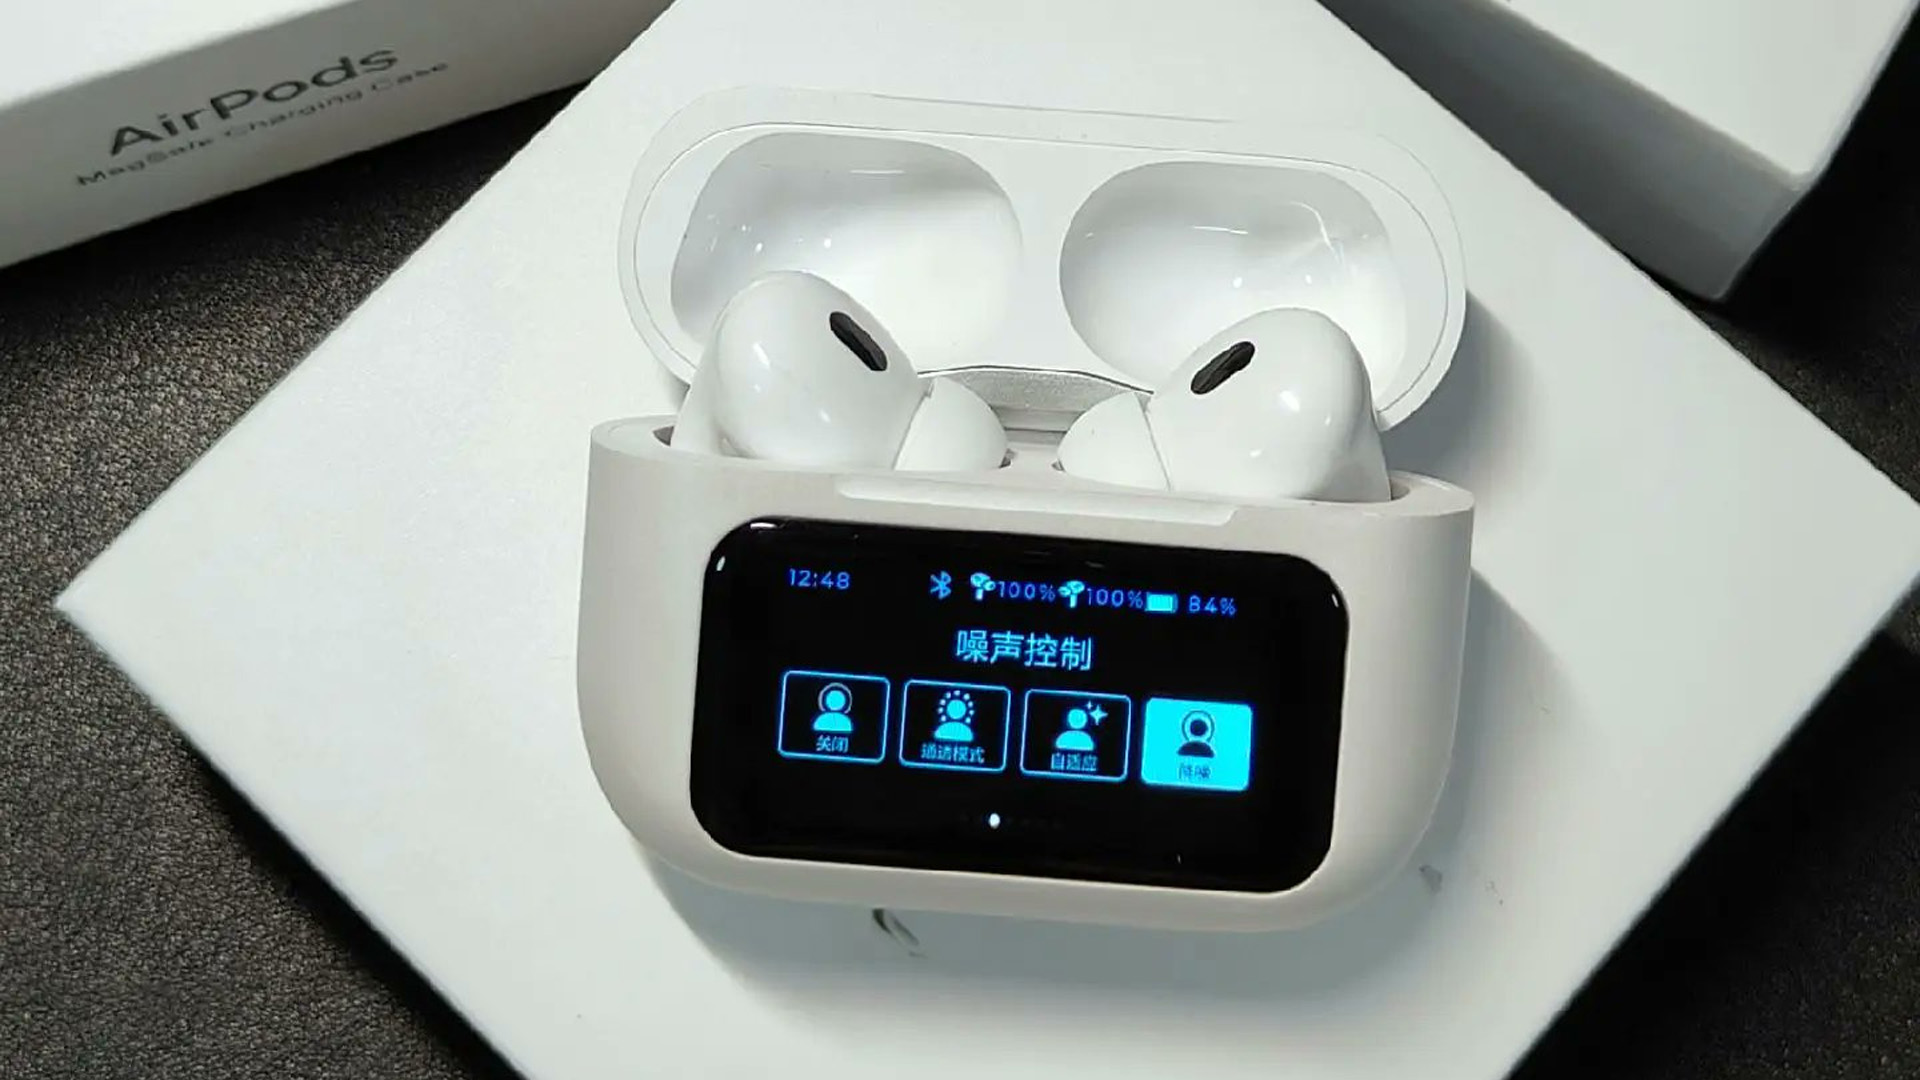 Apple couldn't do it - the Chinese did: fake AirPods with an OLED display case have been created